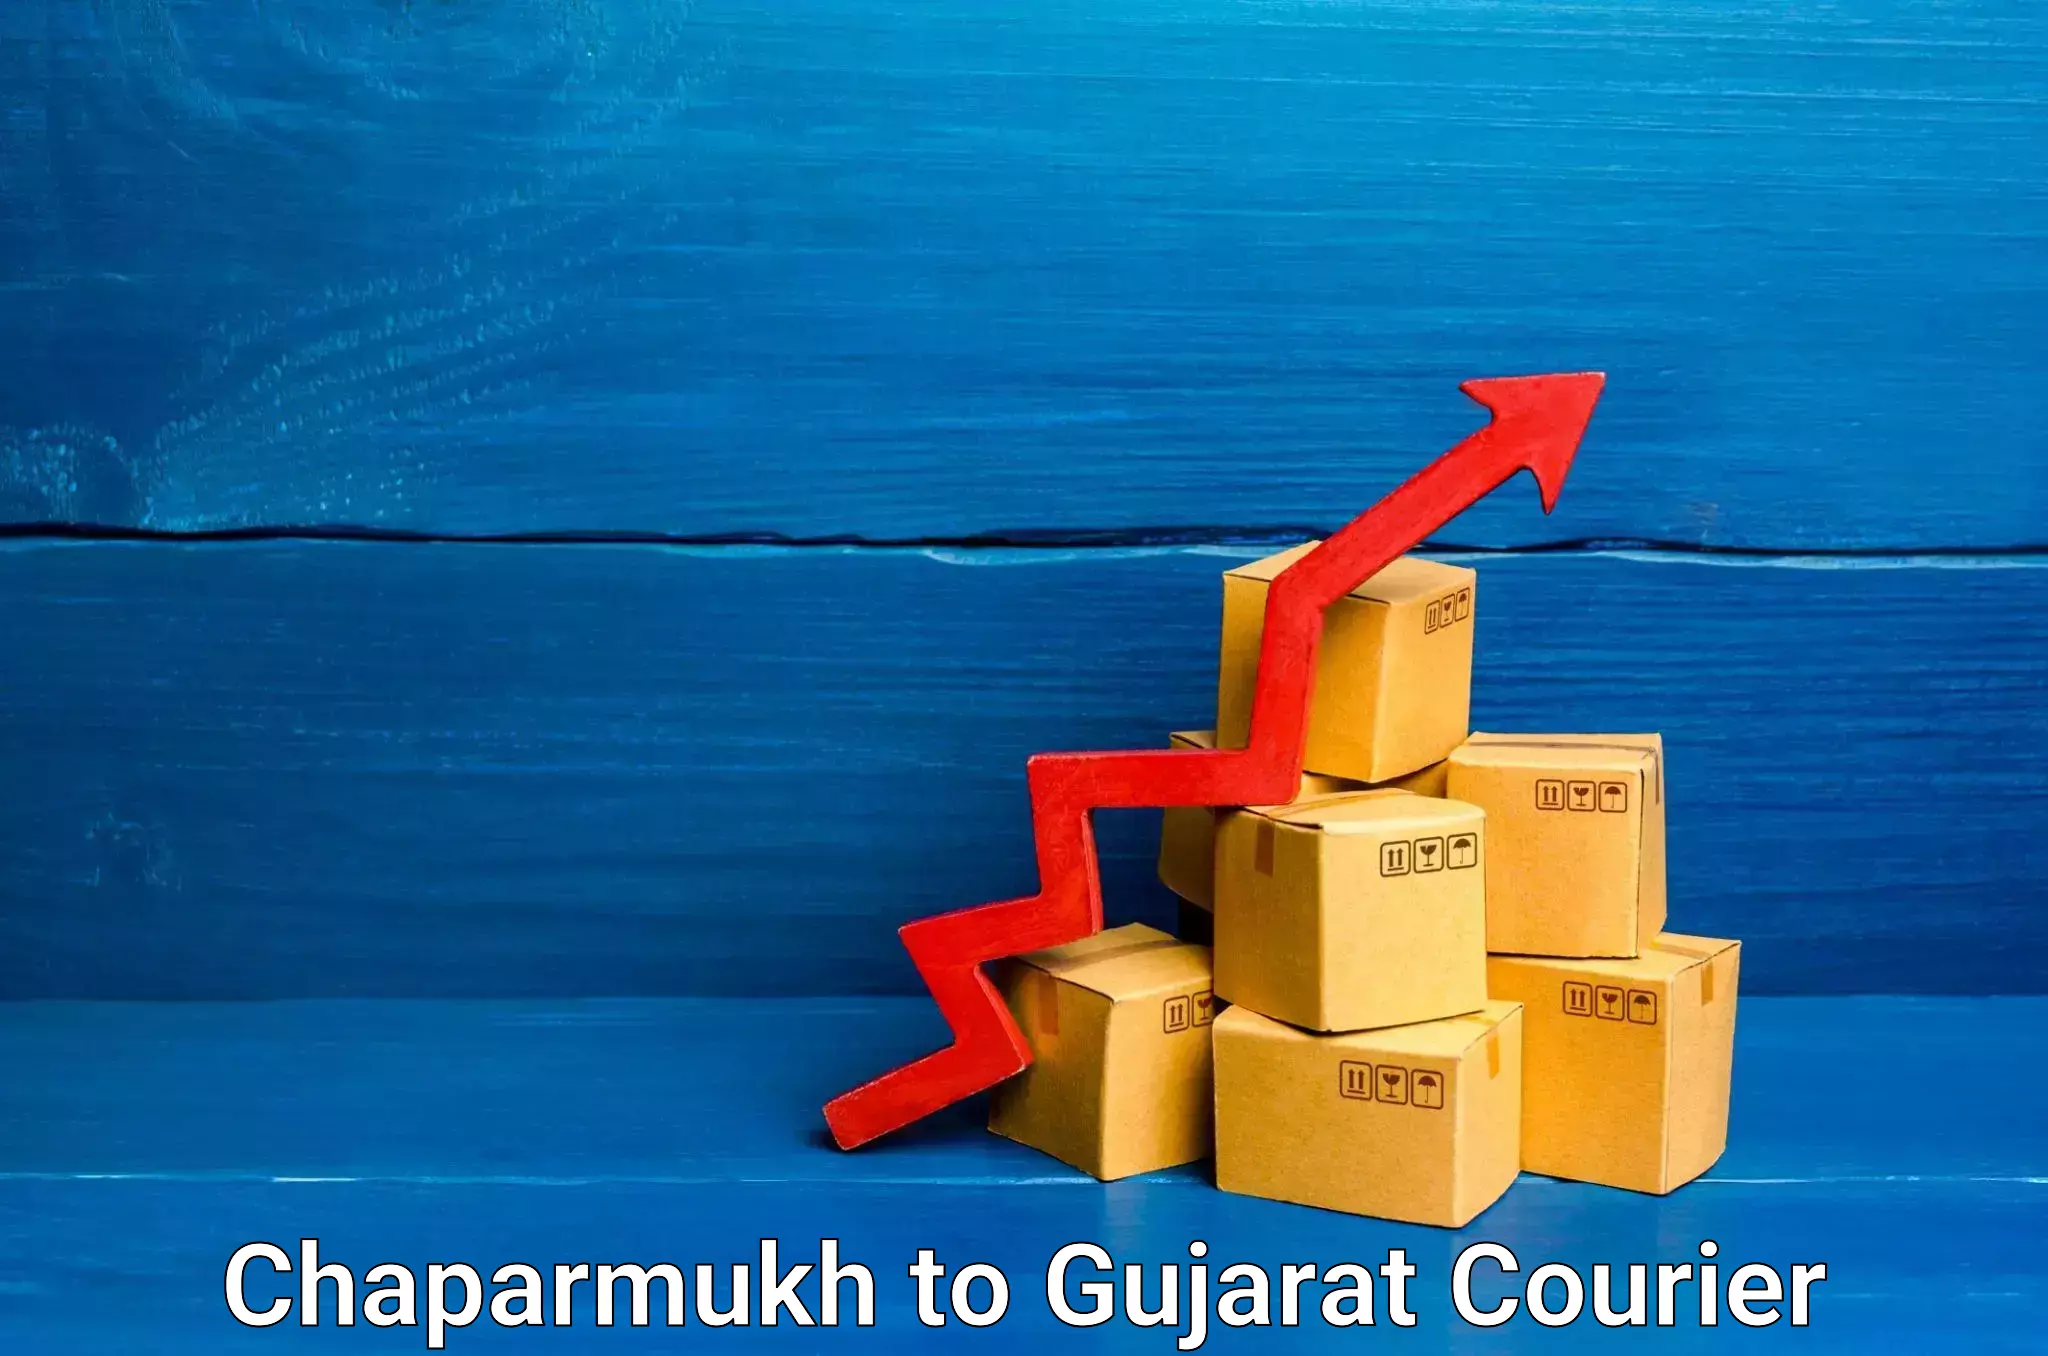 Reliable delivery network Chaparmukh to Gandhidham